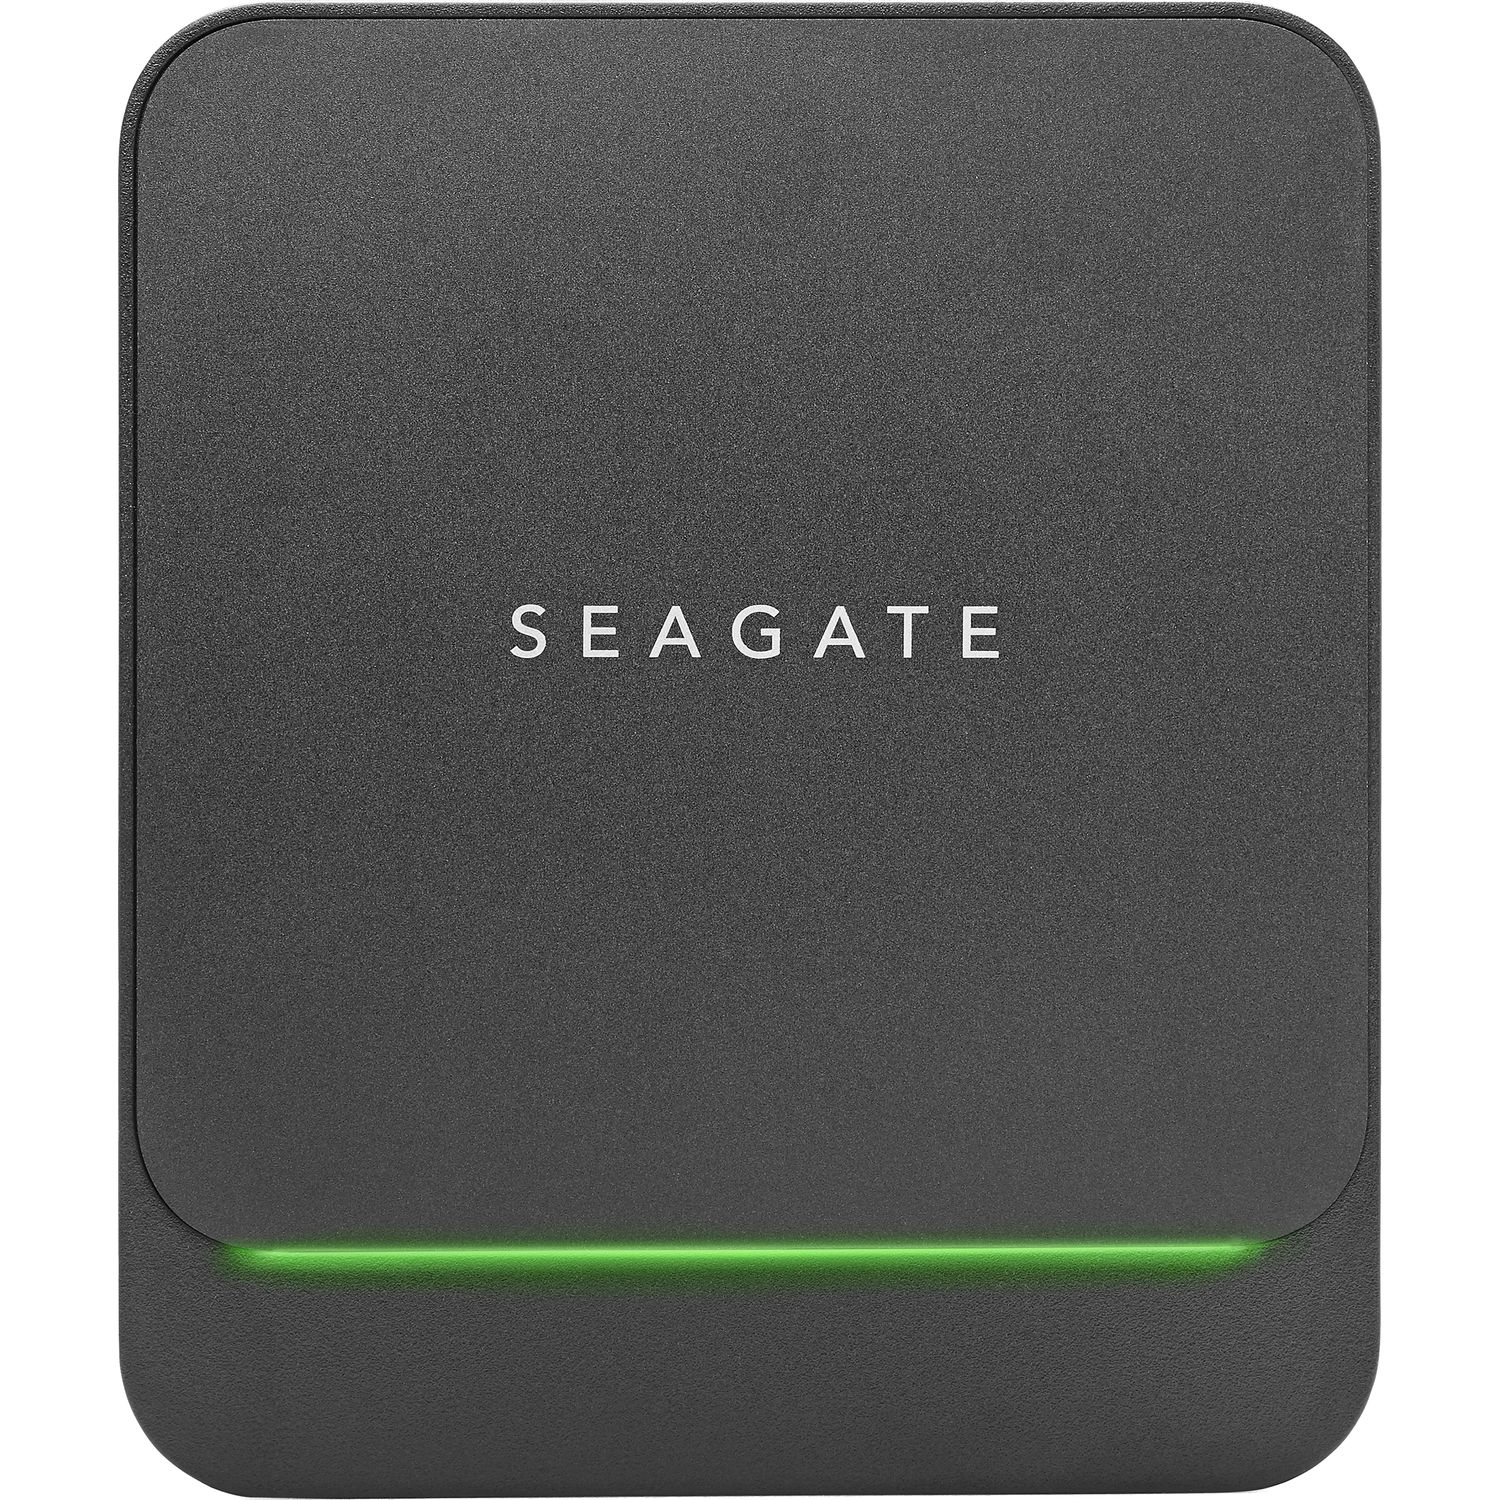 Seagate BarraCuda STJM1000400 1TB Portable Solid State Drive - image 1 of 5